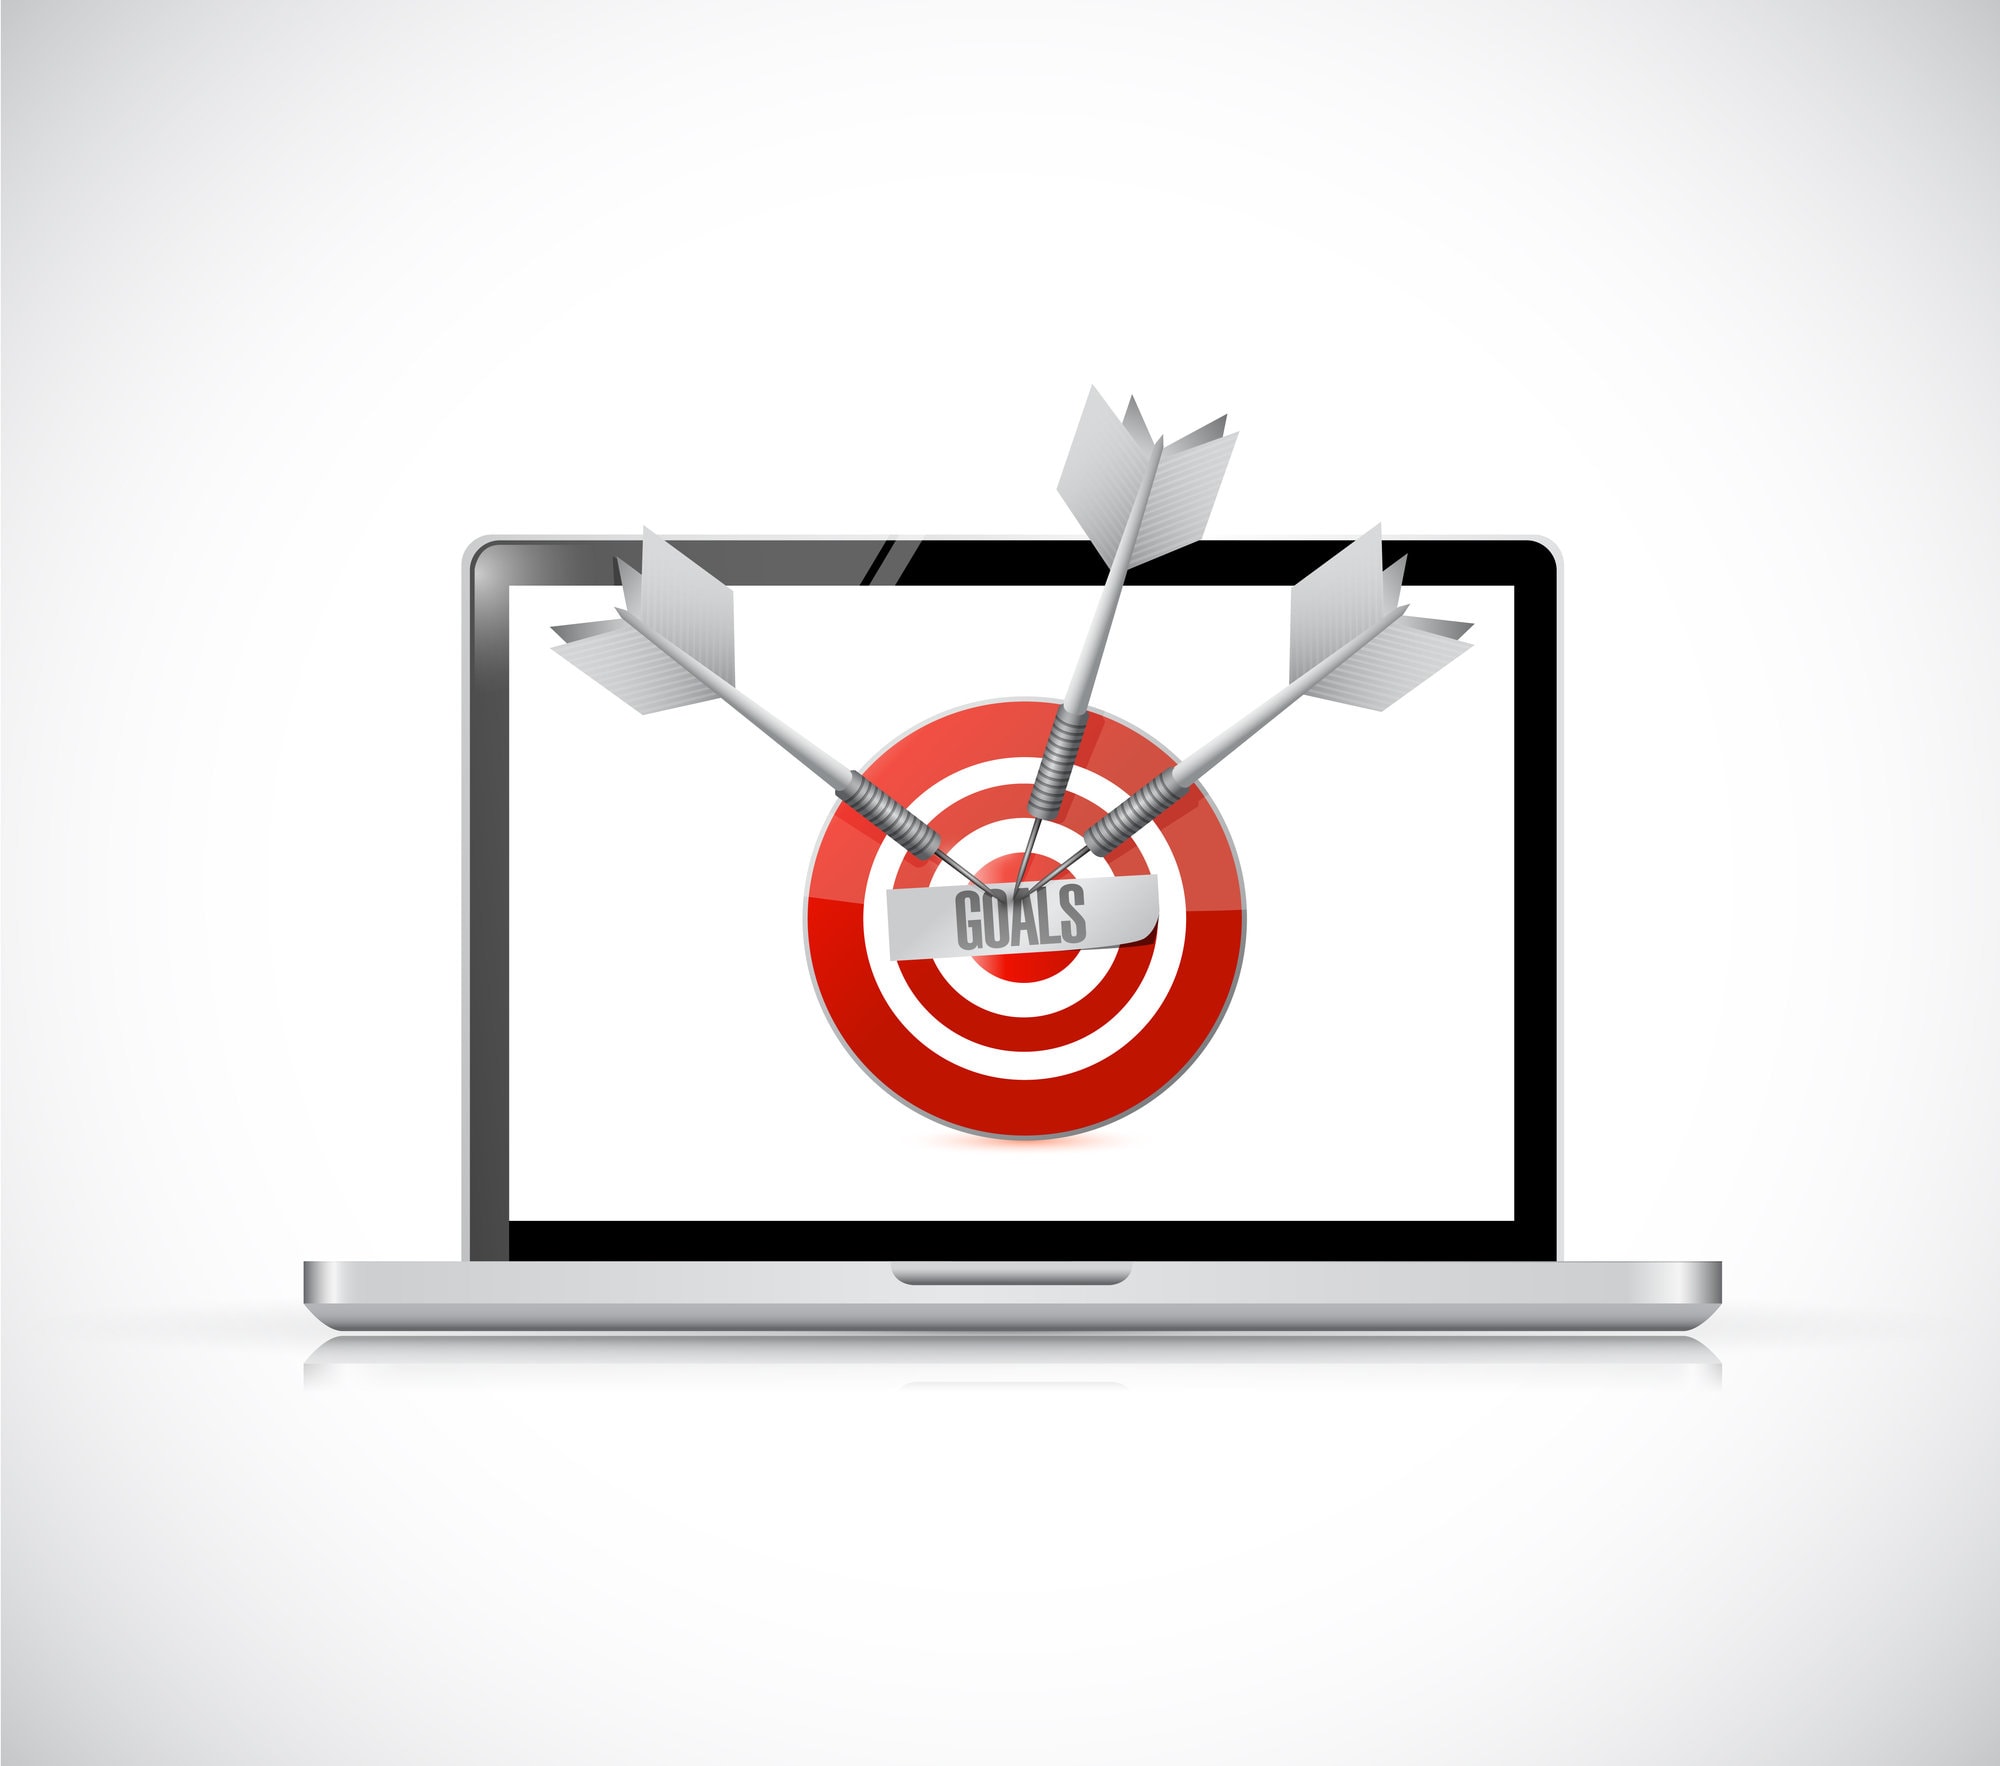 A laptop screen displaying a target and arrows as an organizational guide.